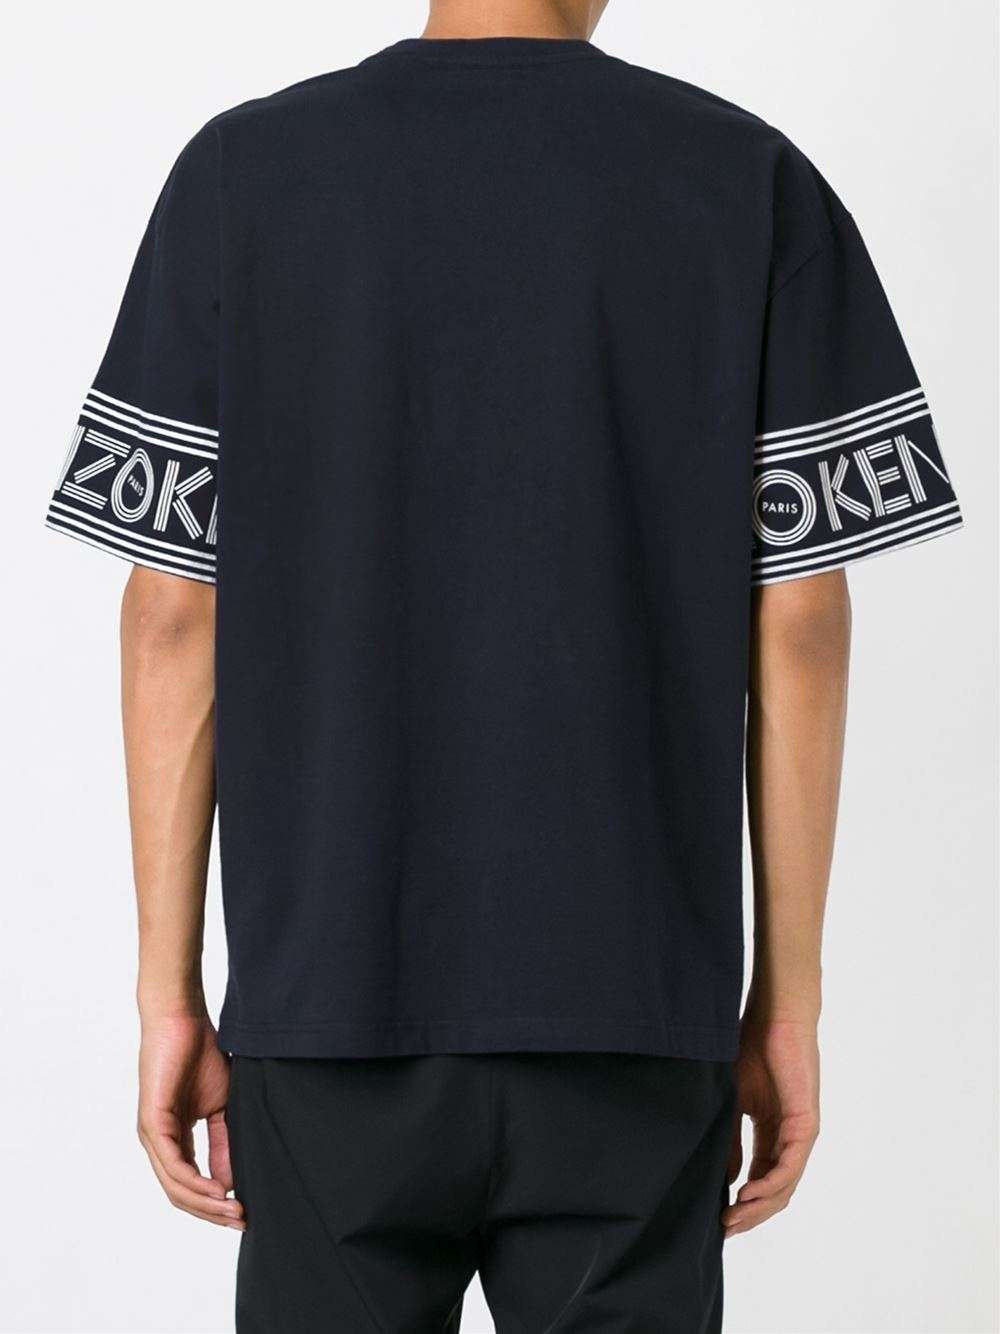 KENZO Printed Sleeve T-shirt in Blue for Men - Lyst